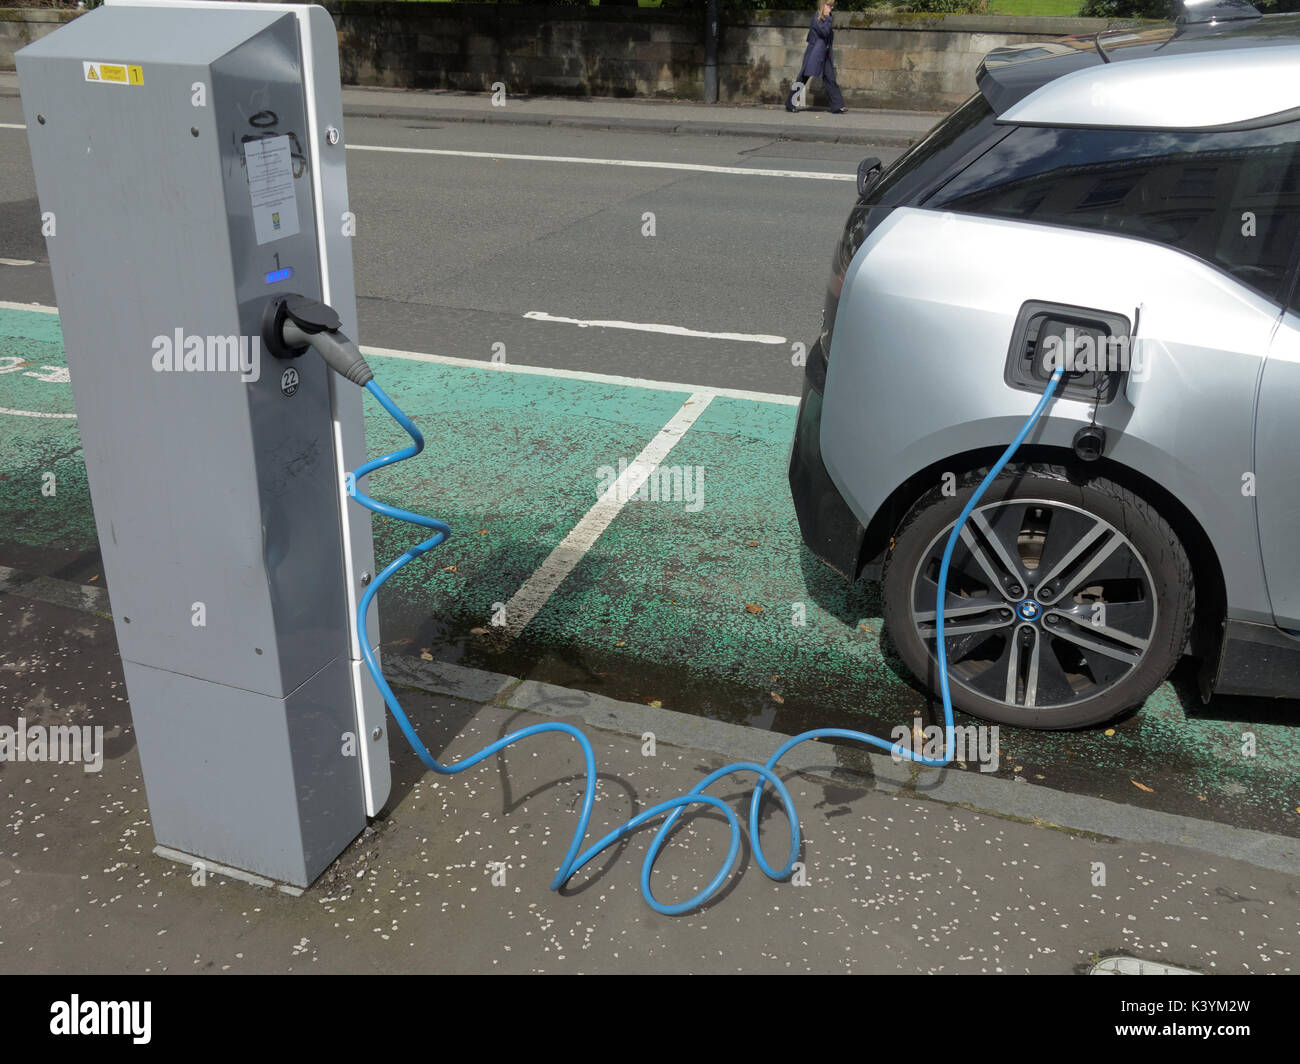 car being charged connected electric car charger point with symbols and signs Siemens electric vehicle charger Glasgow Stock Photo